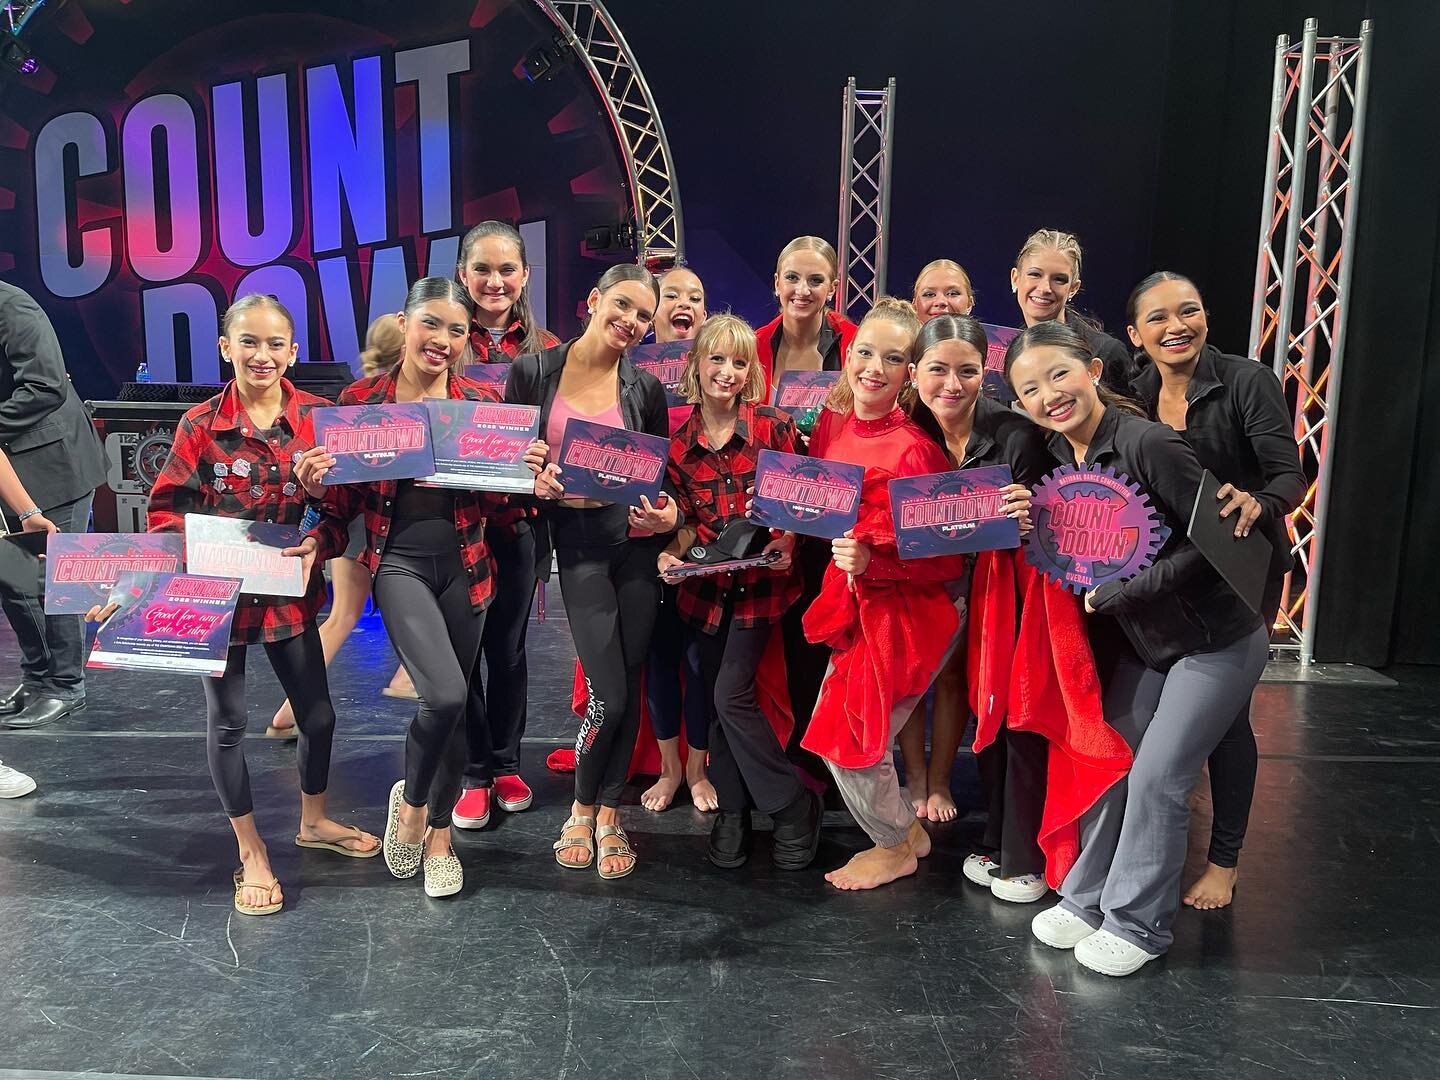 Another weekend, another comp! Our teen soloists started off our last regionals strong! Congrats to&hellip;

@_sloane.mercedes_ 1st overall and title winner 🏆
@caydence_kuo 2nd overall 
@_cc_olsen_ 9th overall 

@jordan.seto 2nd for title 
@avaqsar 